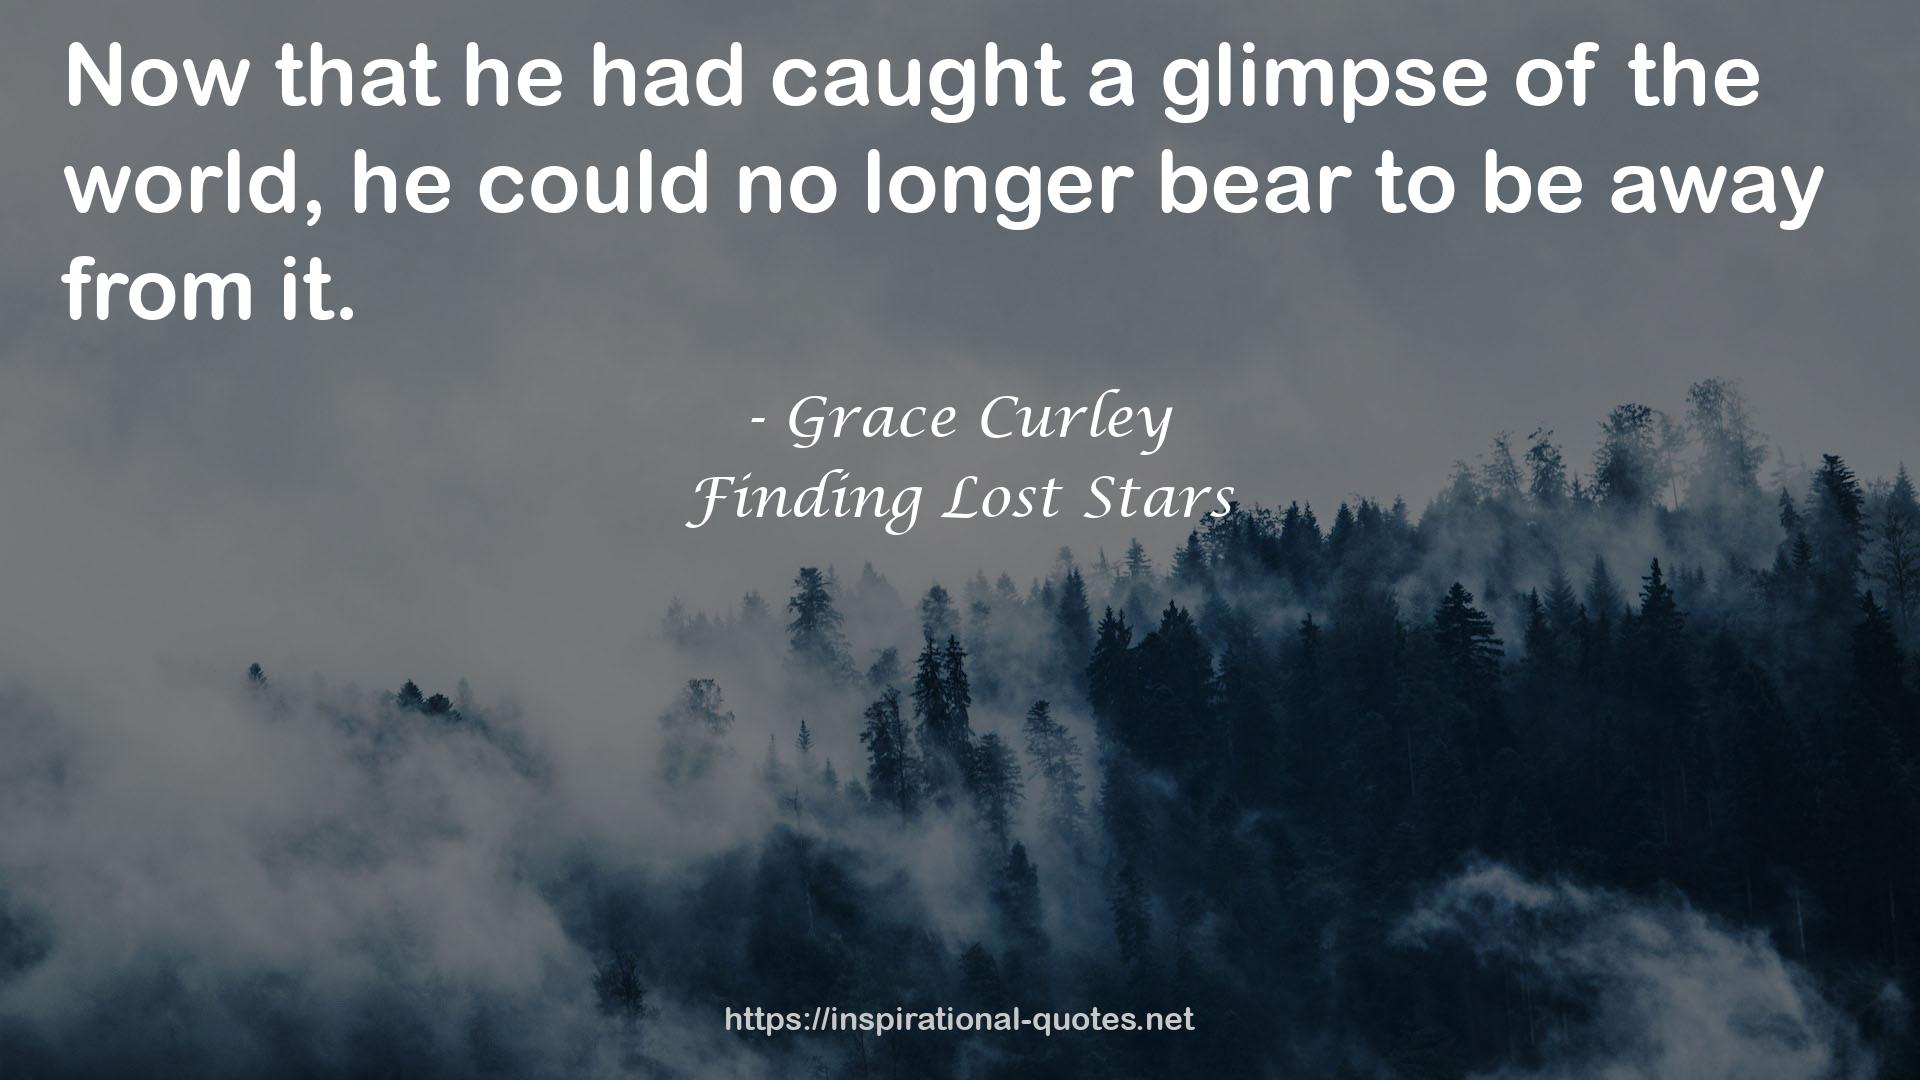 Grace Curley QUOTES